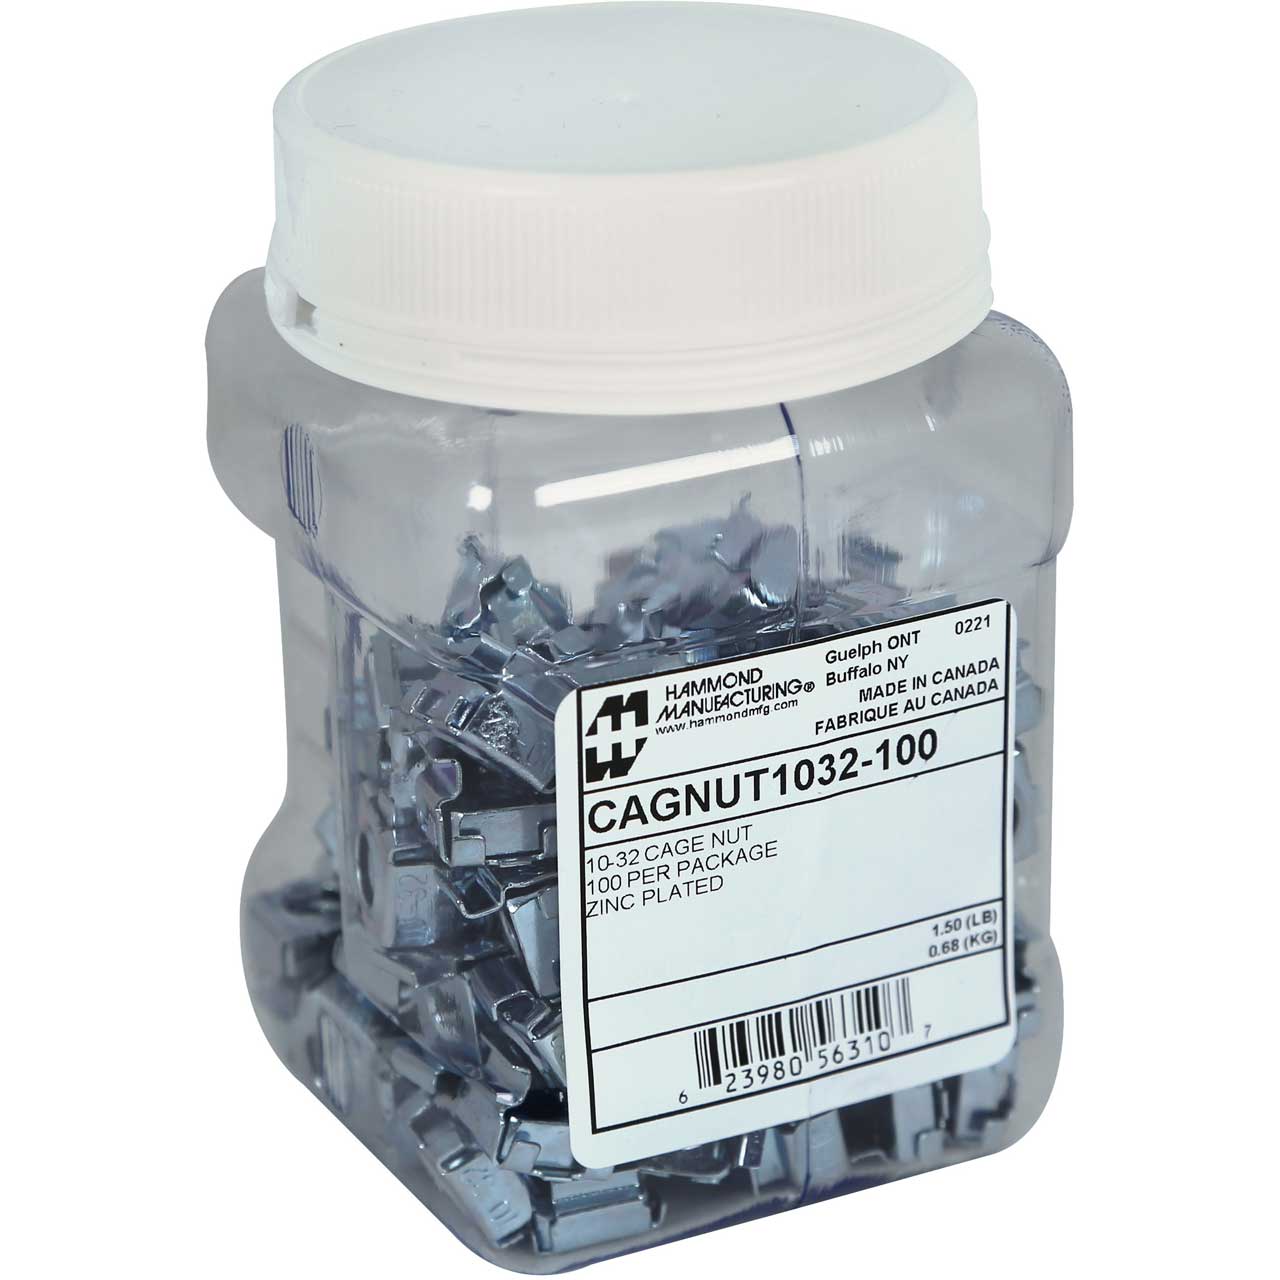 Hammond CAGENUT1032-100 10-32 Cage Nuts for Square Hole Punched Rack Rails - 100 Pack in Plastic Jar CAGNUT1032-100